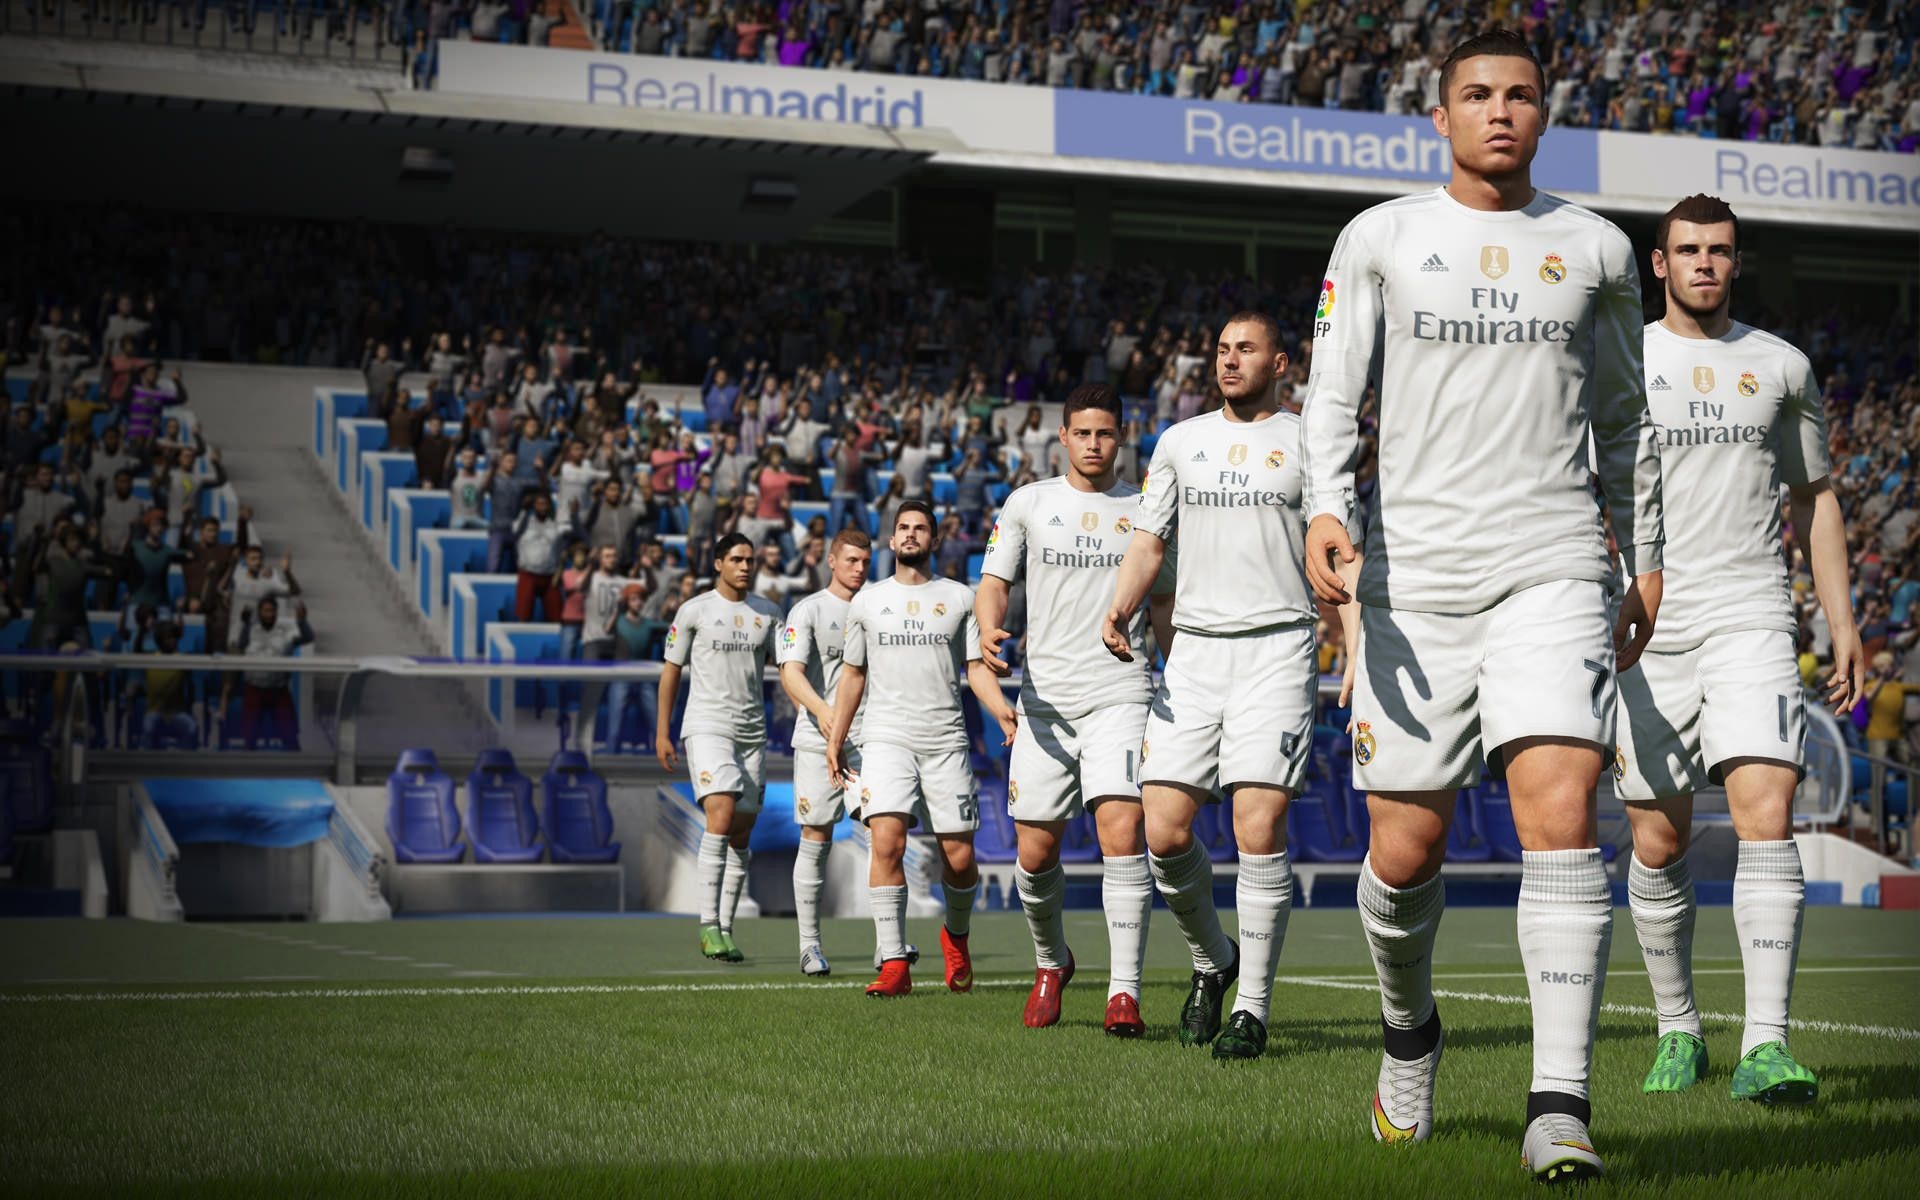 FIFA Soccer (Game): One of the most popular football simulation video games of all times, Real Madrid. 1920x1200 HD Wallpaper.